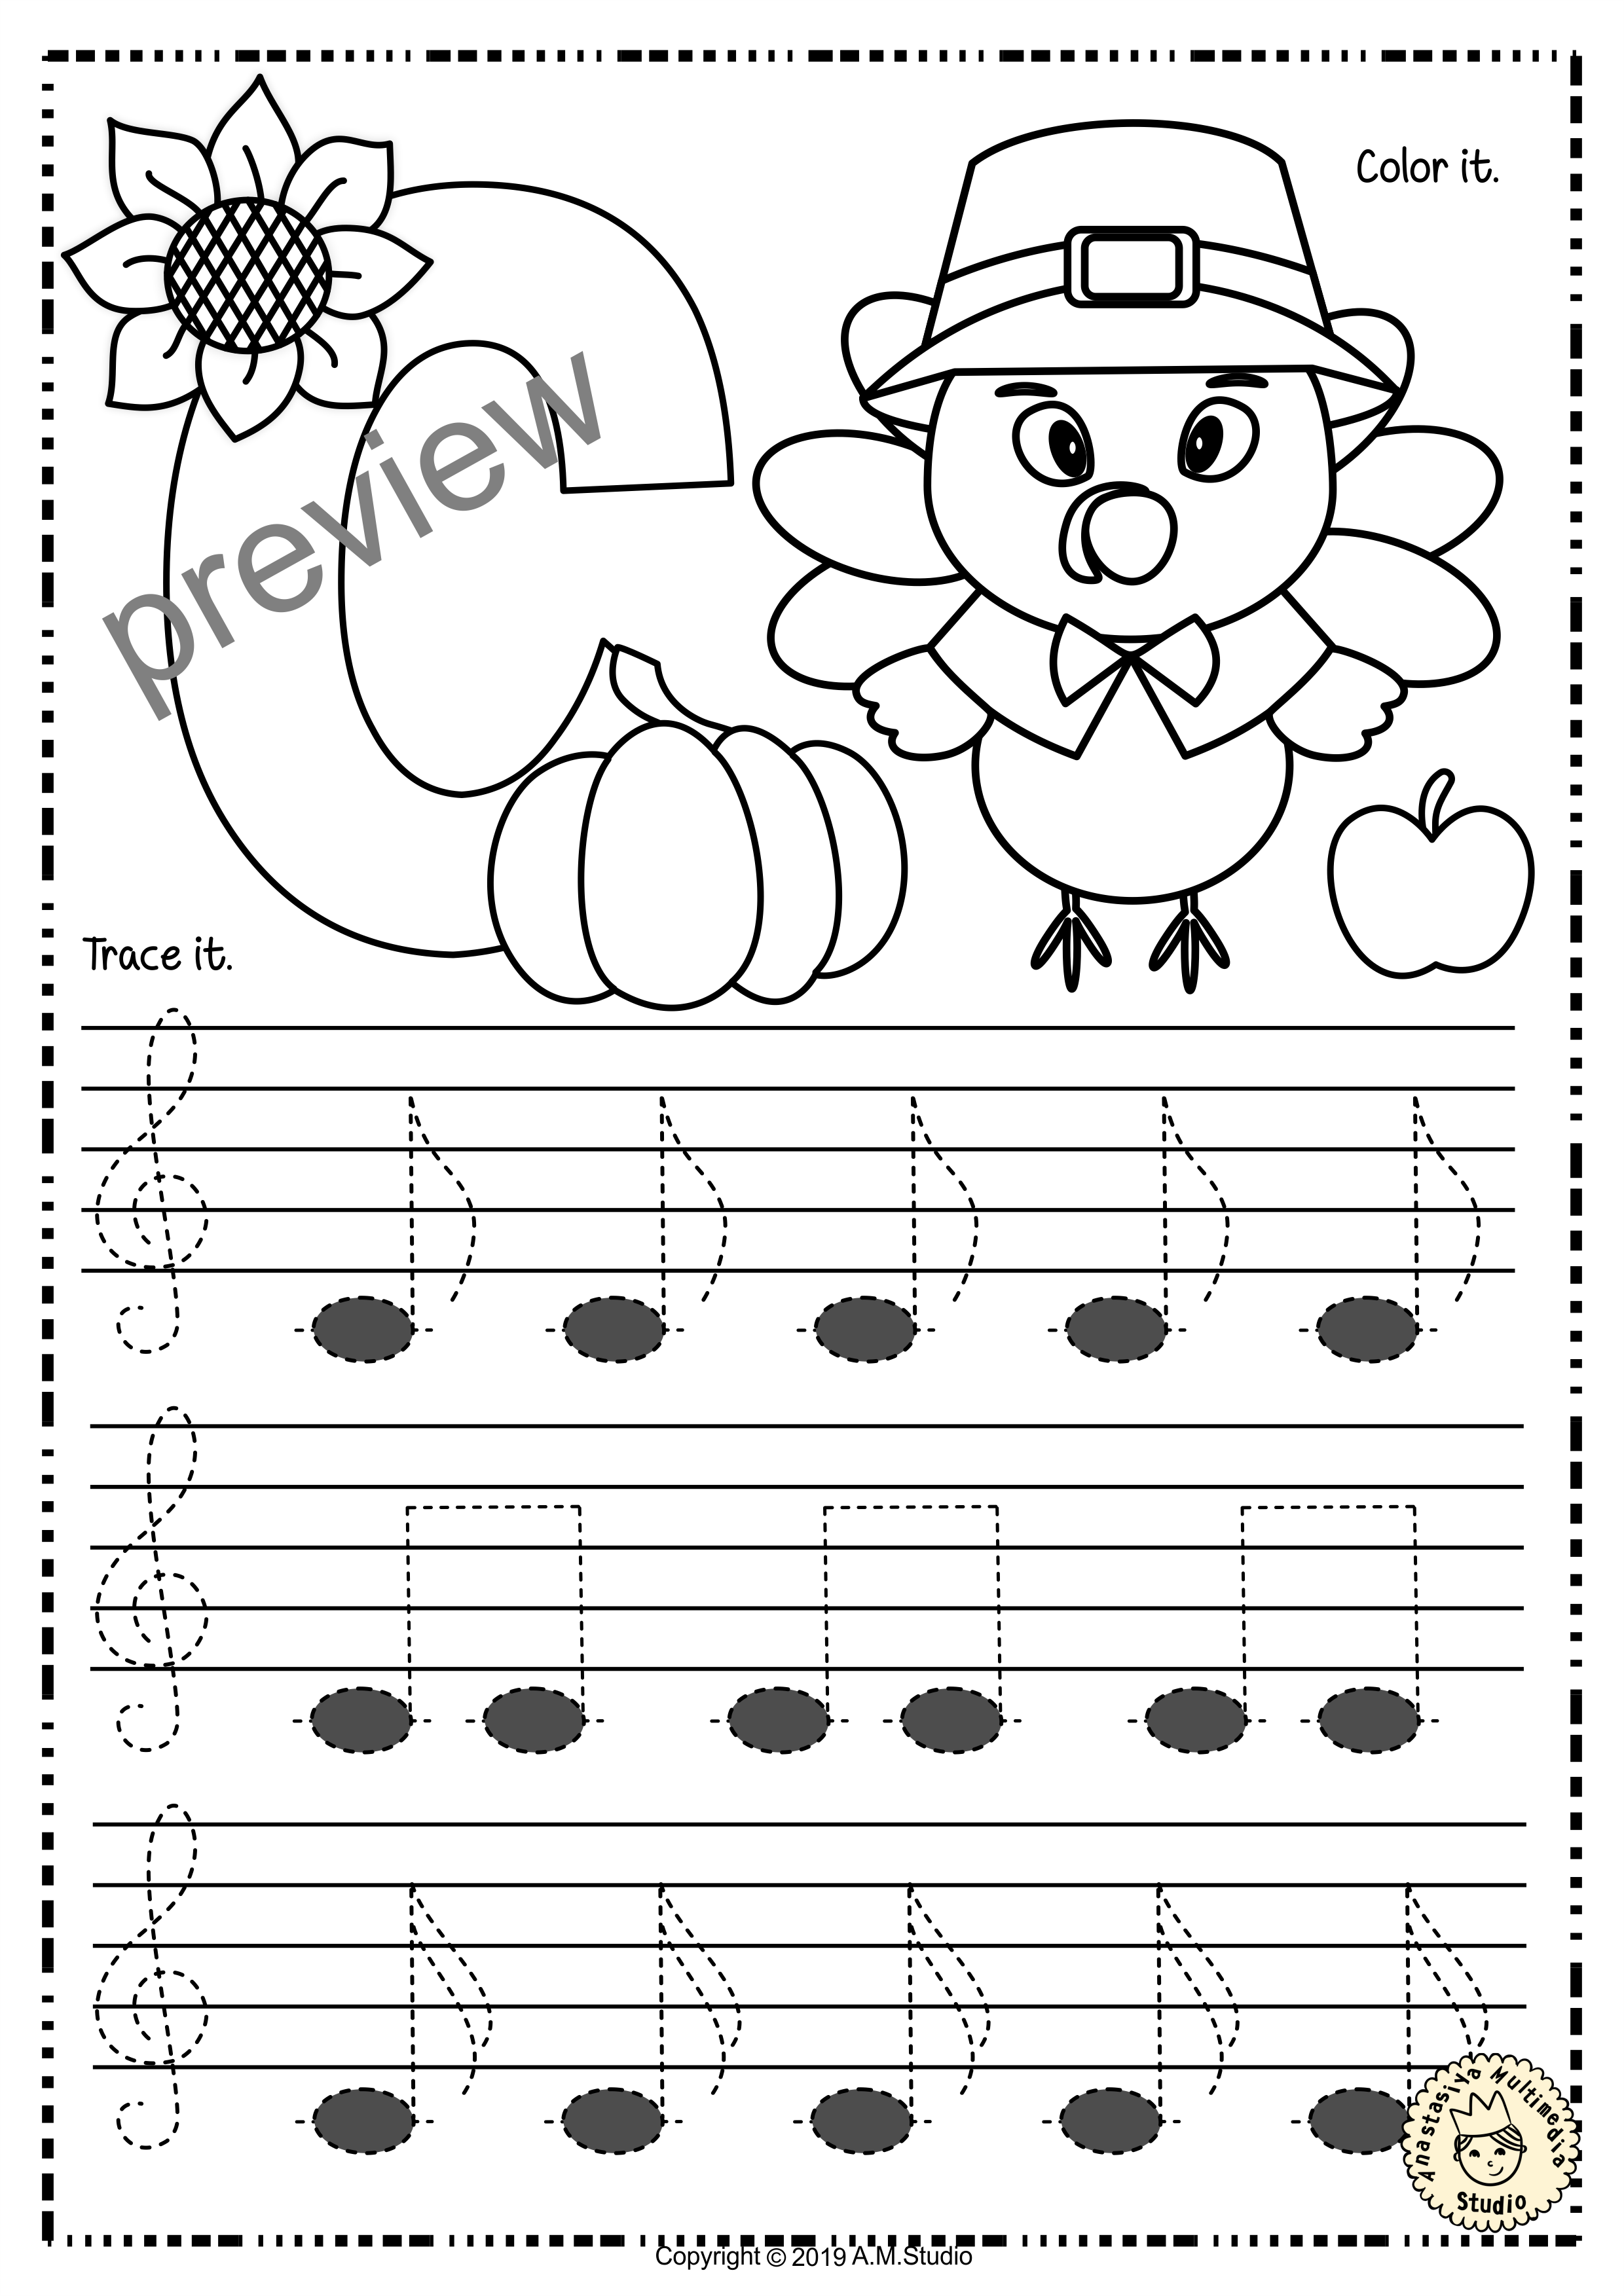 Treble Clef Tracing Music Notes Worksheets for Fall (img # 1)